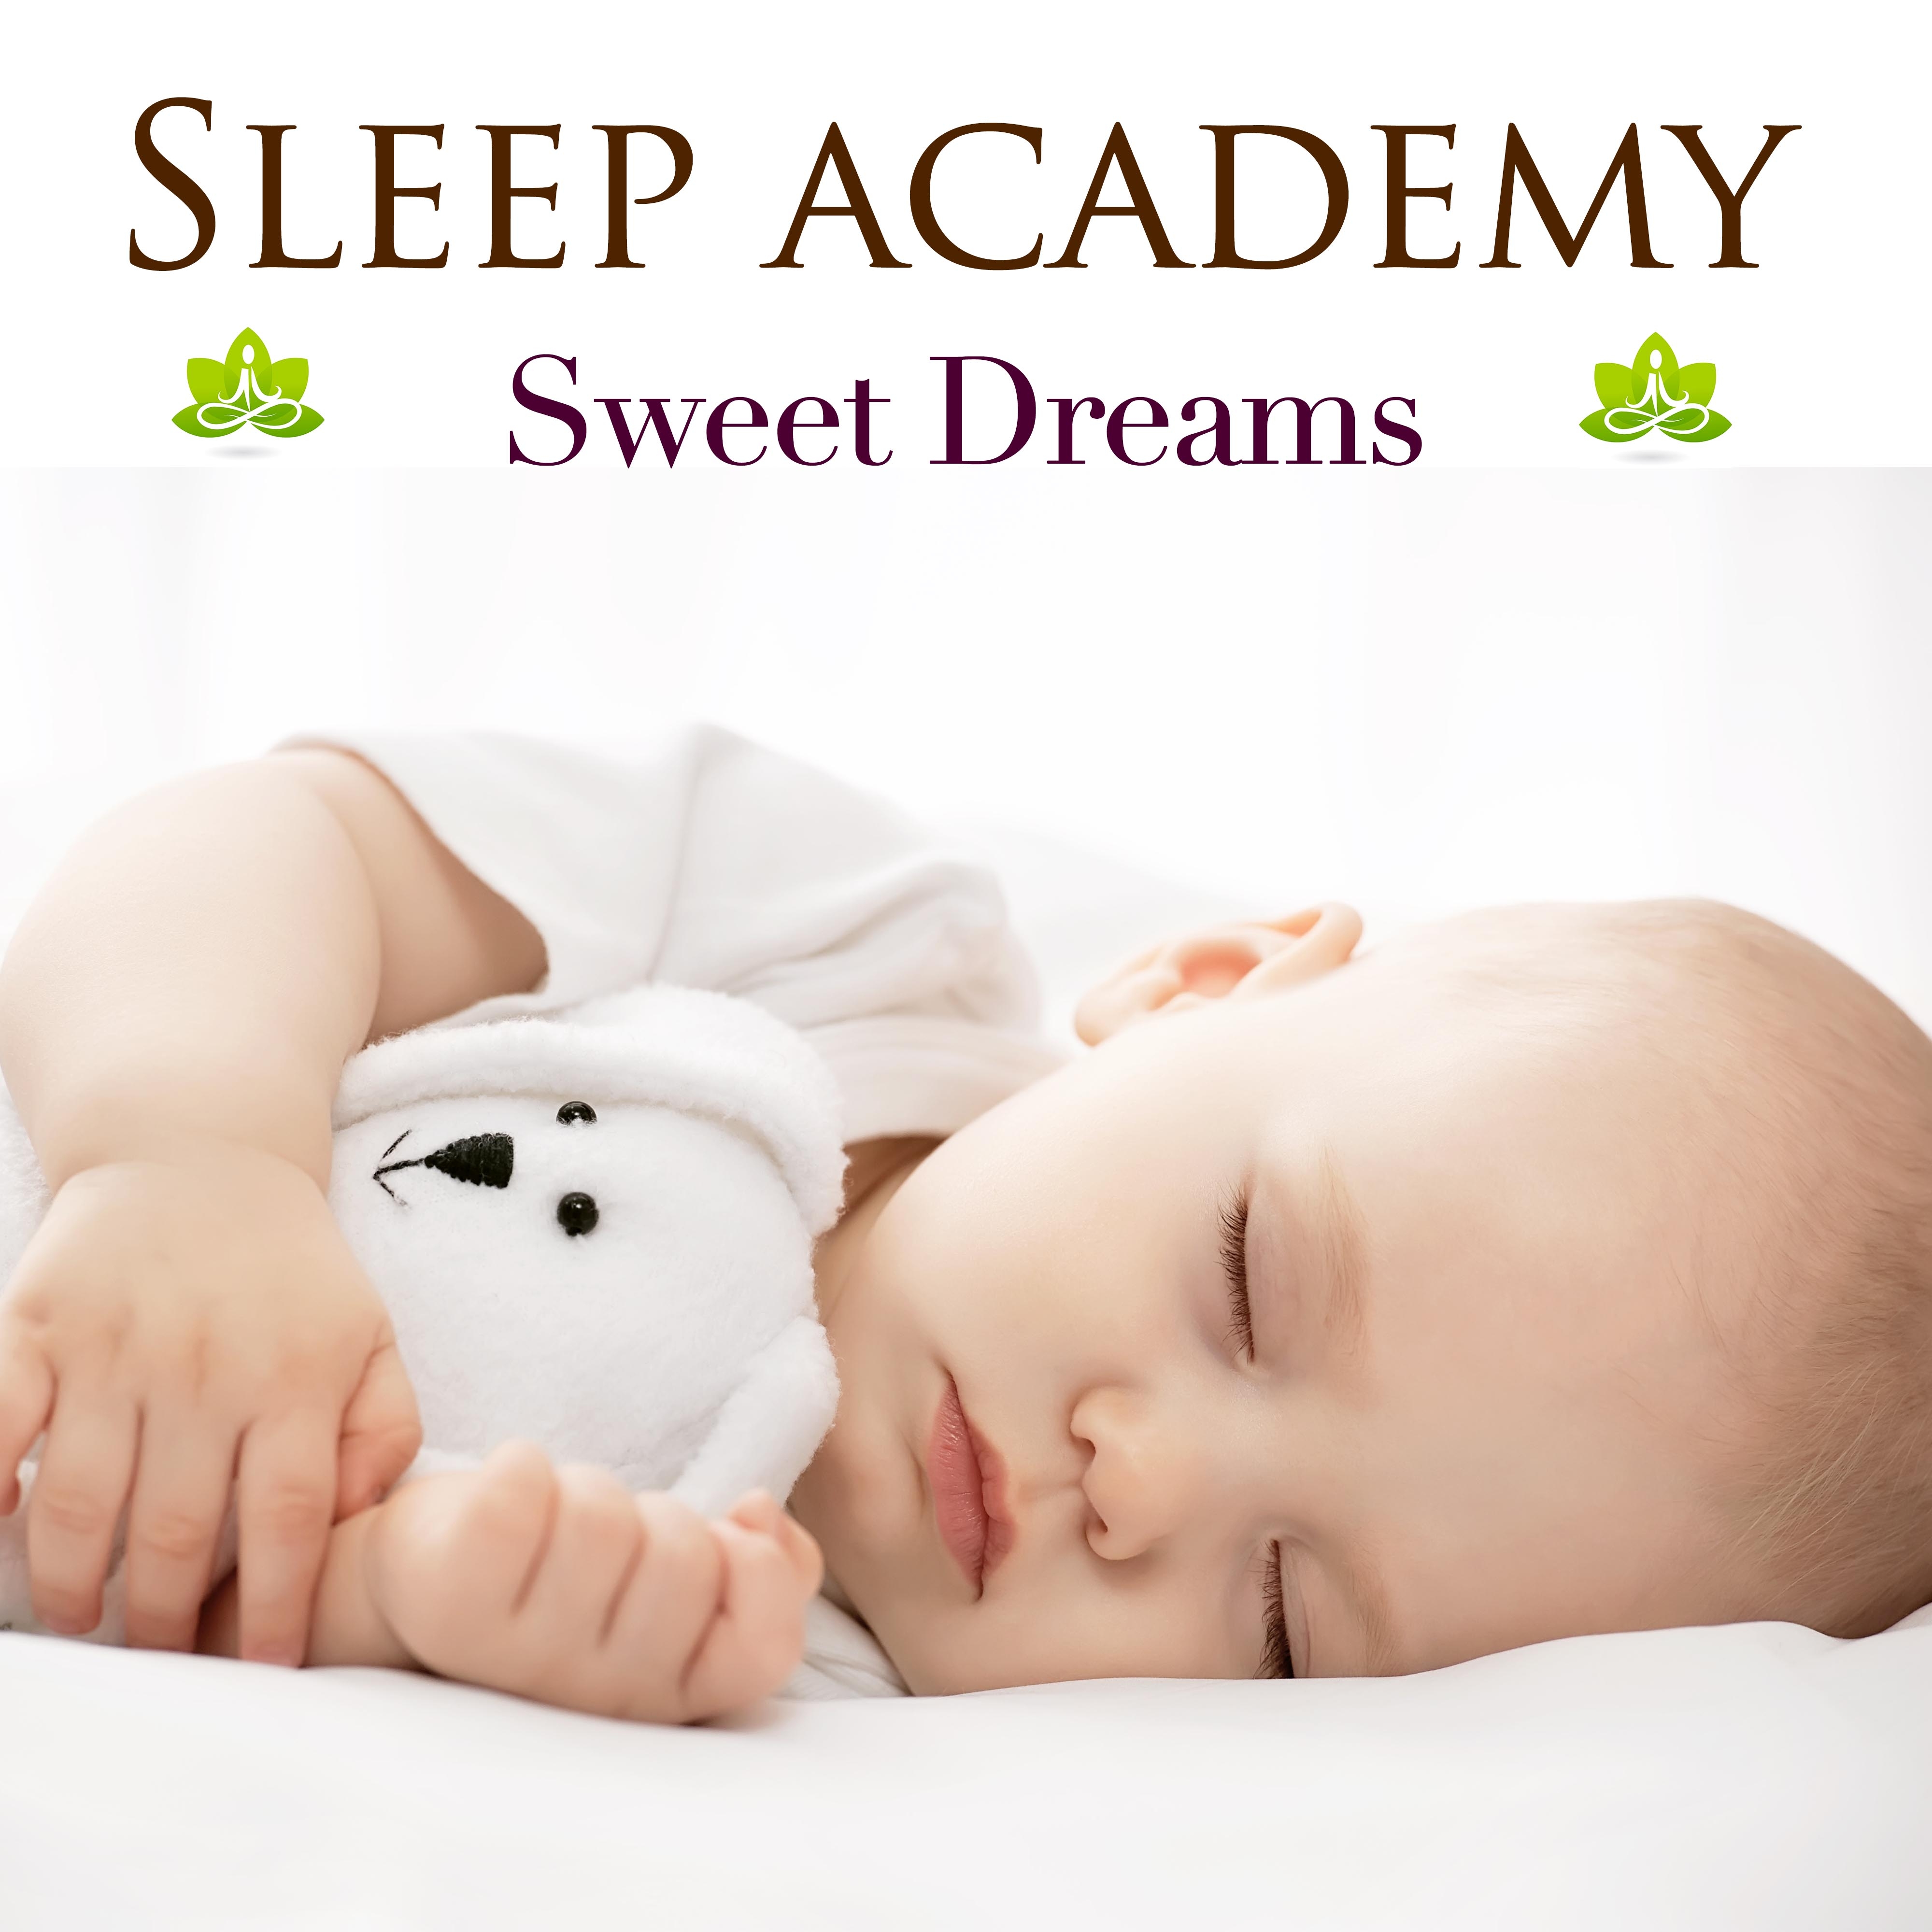 Sleep Academy - Lie Back, Close your Eyes and Have Sweet Dreams